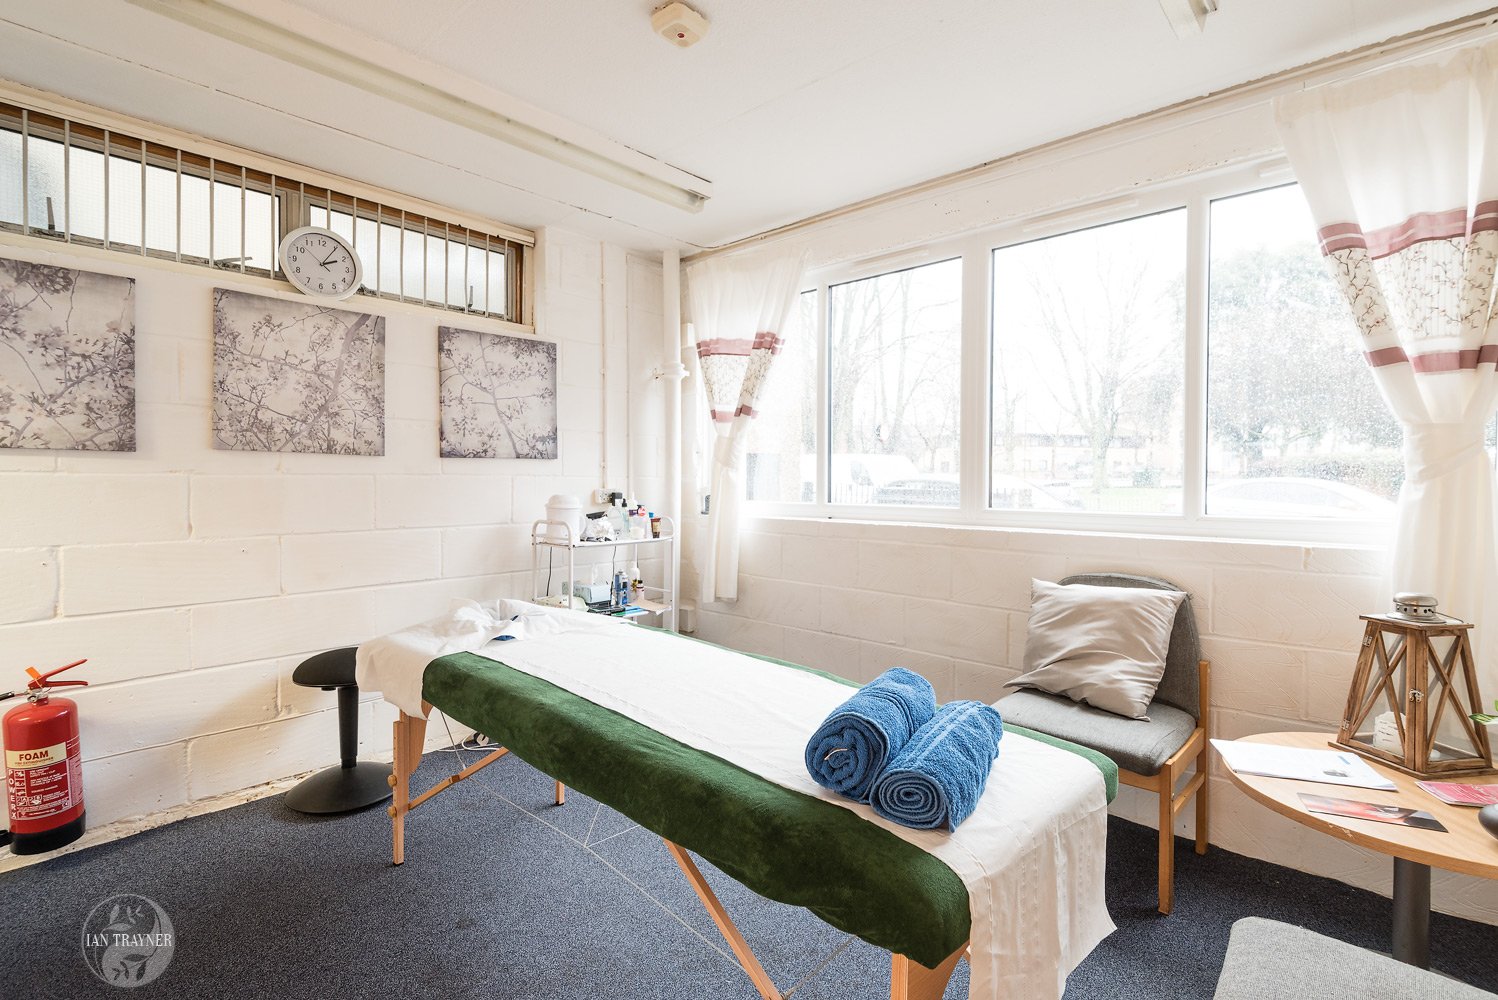 massage therapy room (with snow outside!)